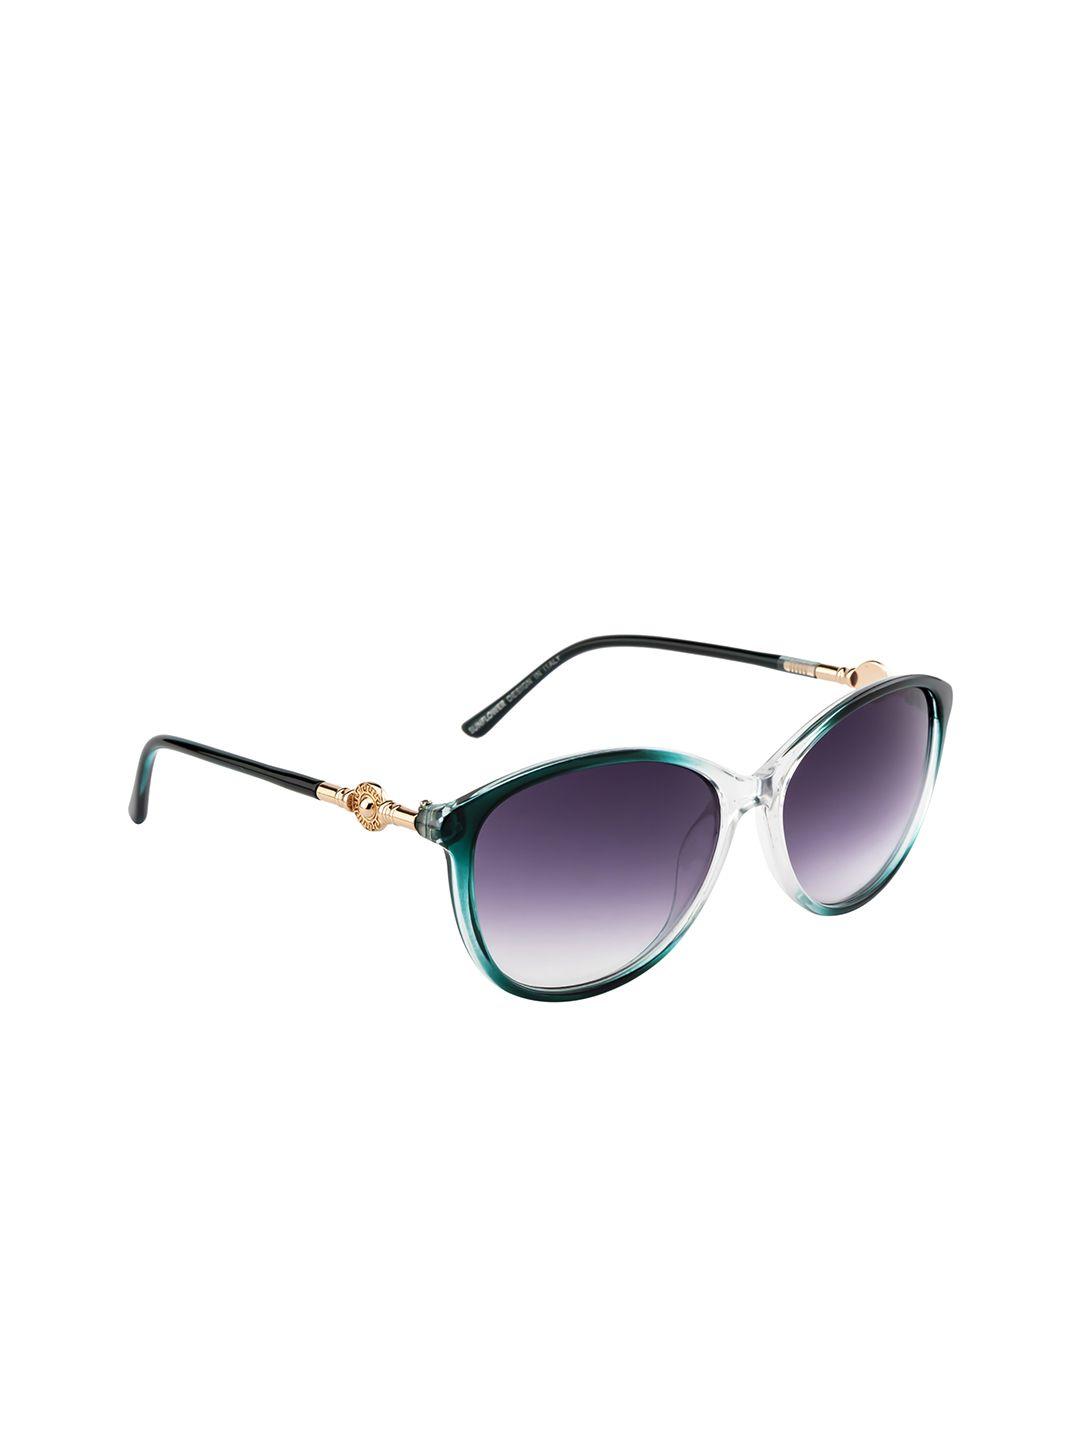 dressberry women purple lens & green oval sunglasses with uv protected lens db-p8558-c5